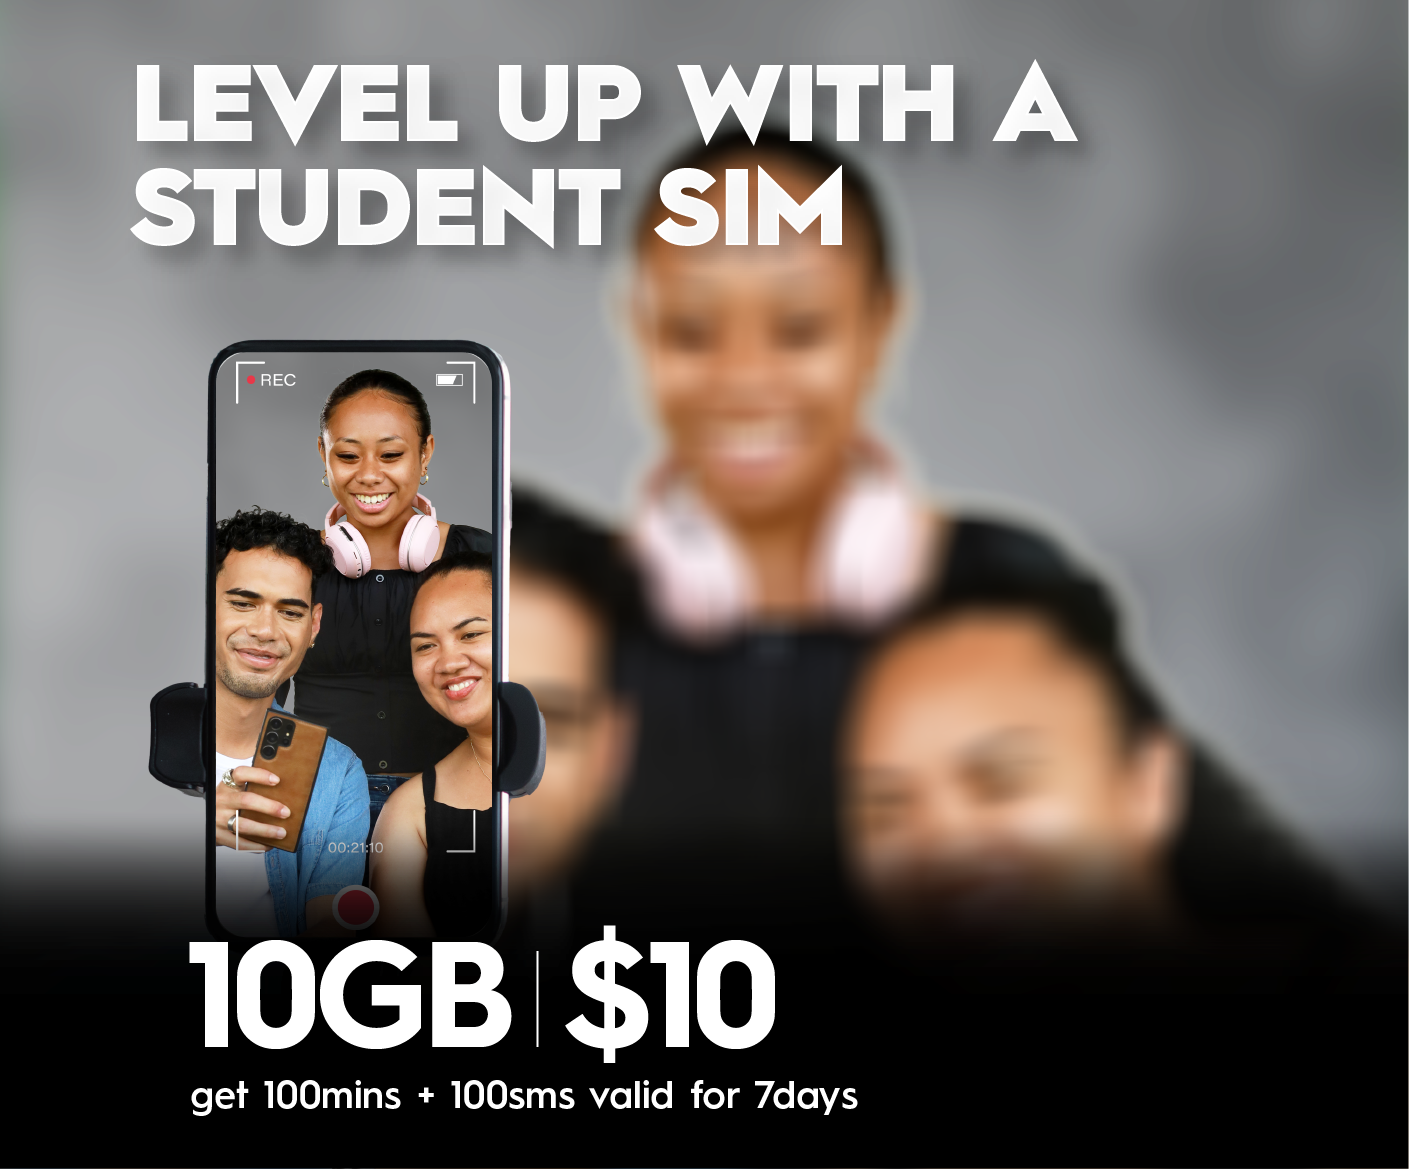 https://www.digicelpacific.com/mobile/to/promotions/student-plan-back-to-school